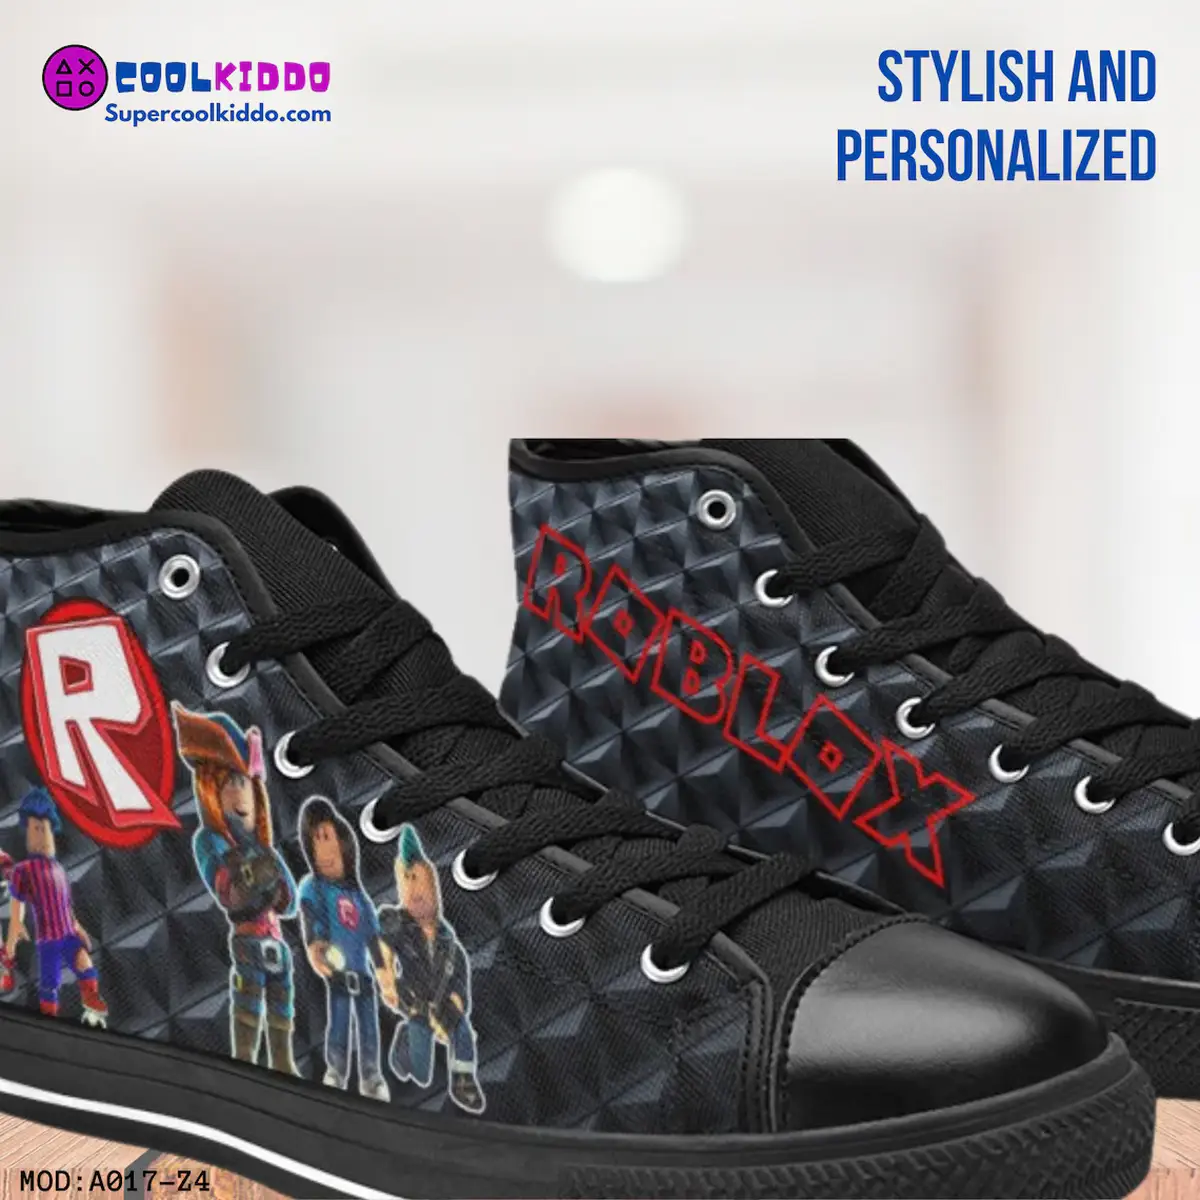 ROBLOX Video Game Inspired High Top Shoes for Kids/Youth Cool Kiddo 20